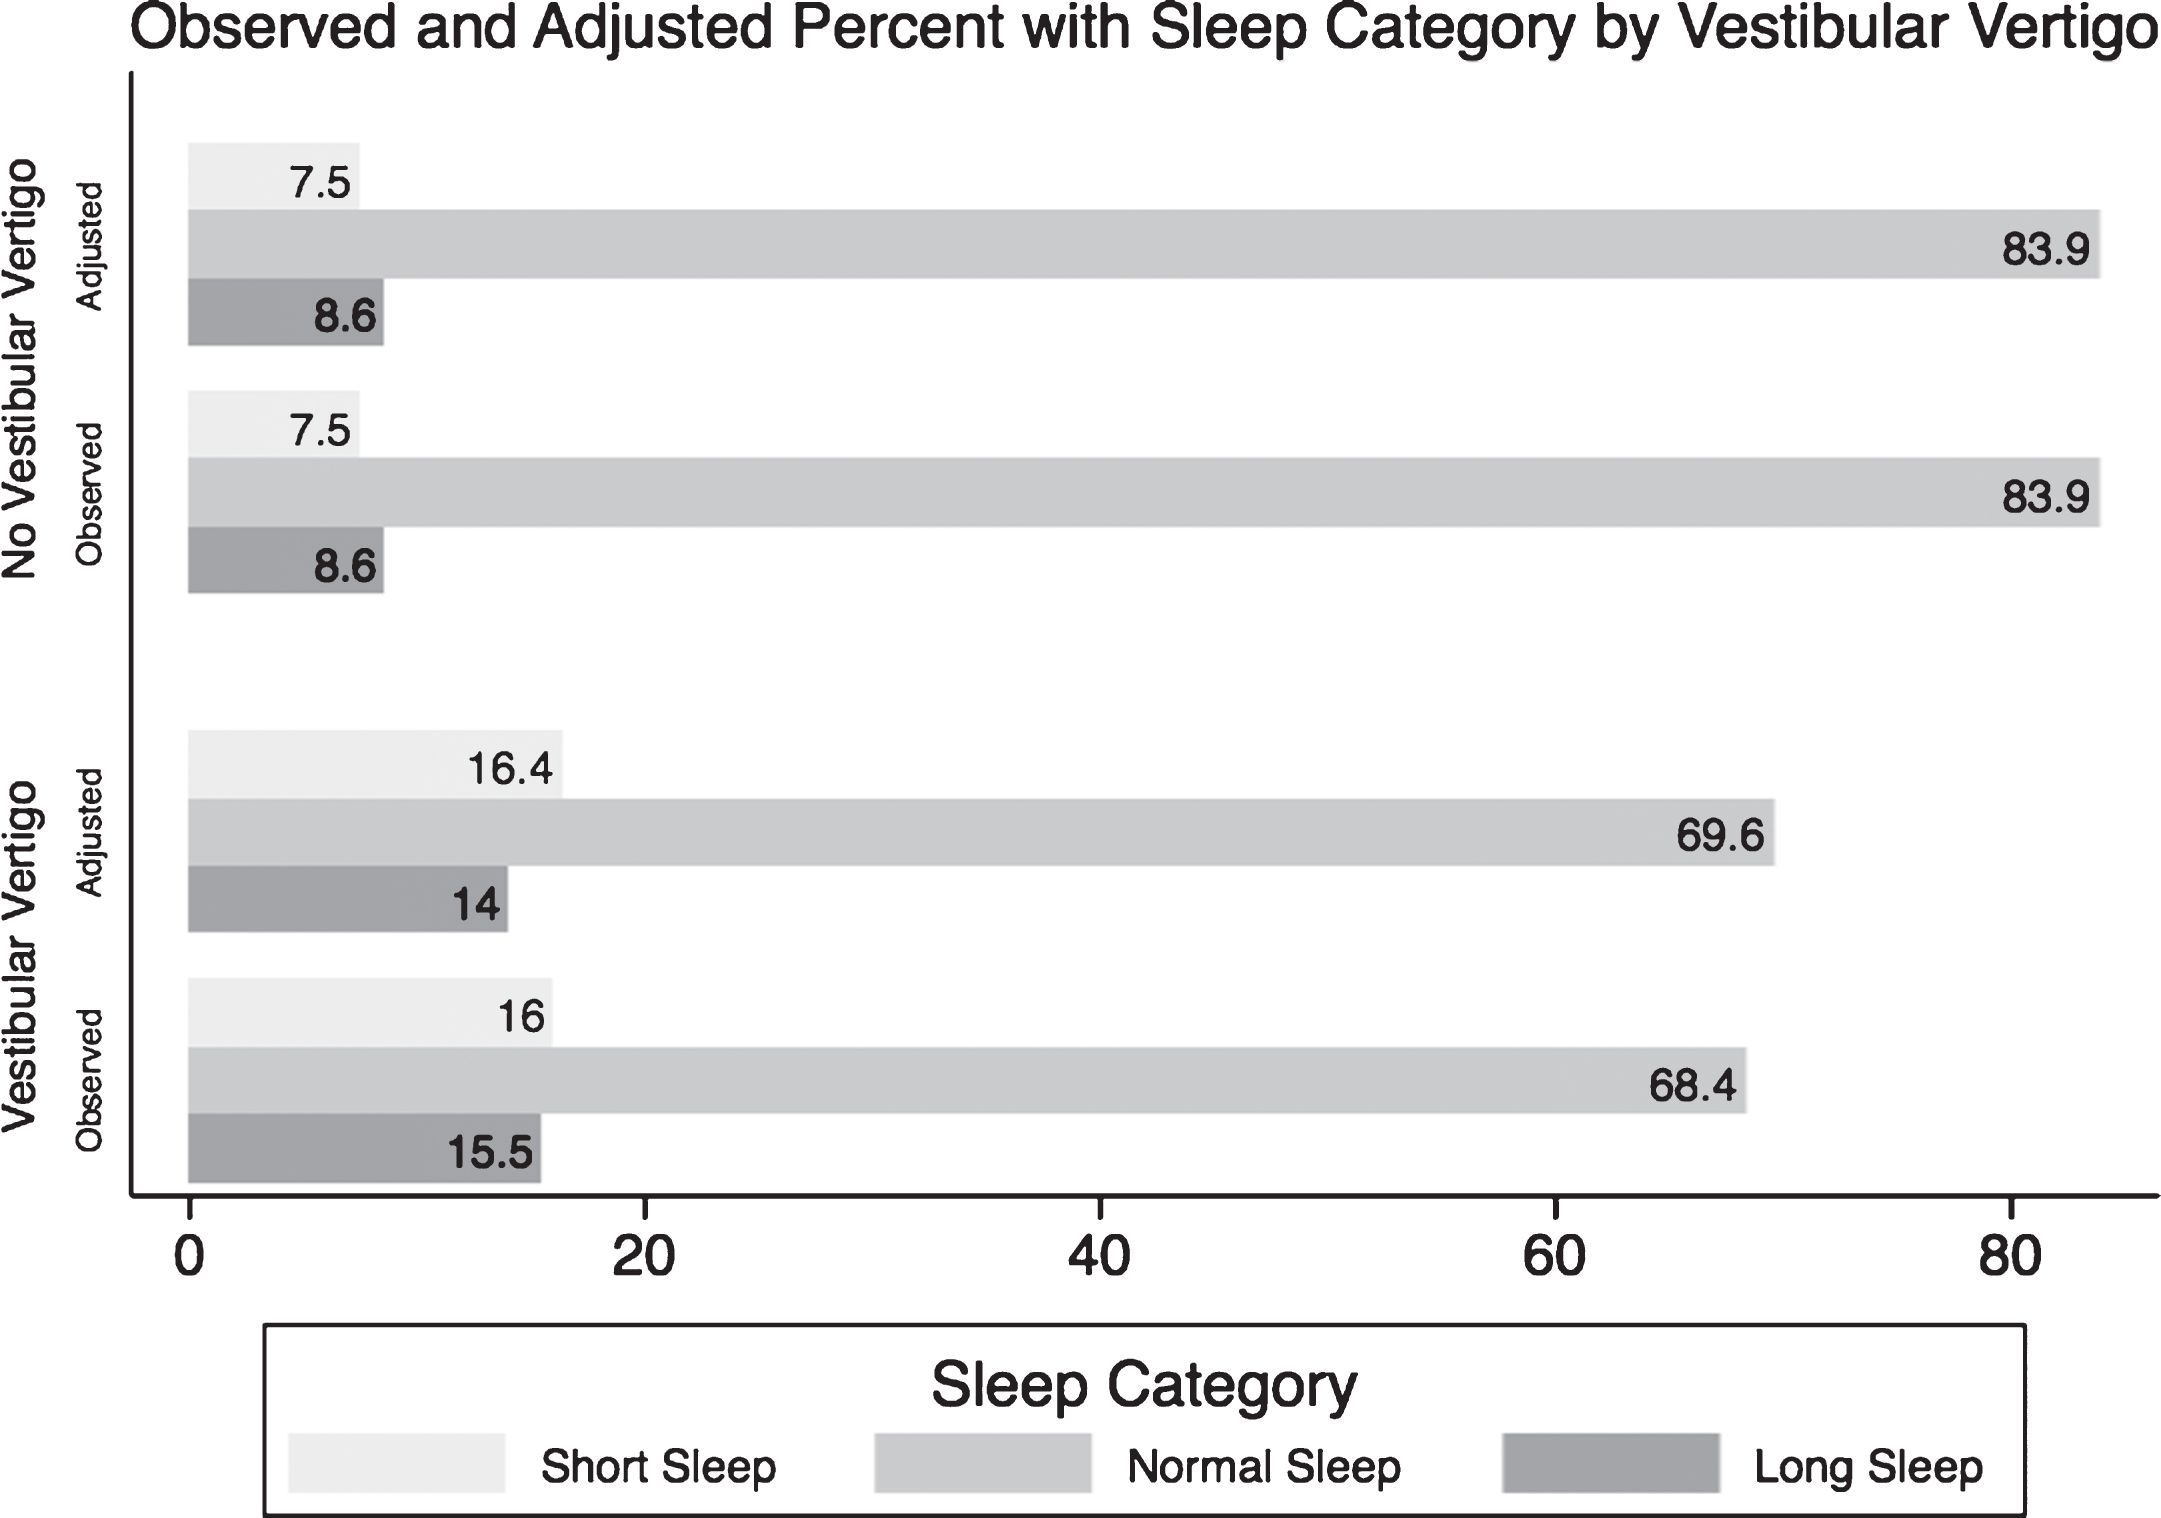 A graph comparing the observed (crude) and the predicted (adjusted) percentages of each sleep category in normal individuals and in people suffering from vestibular vertigo. *From the Null Multinomial Logistic Regression of Sleep Categories and Vestibular Vertigo only. ∧From Extended Multinomial Logistic Regression model including the following covariates: age, race, education level, income, BMI, smoking history, diabetes, hypertension, asthma, chronic fatigue, depression, panic disorder and generalized anxiety disorder.